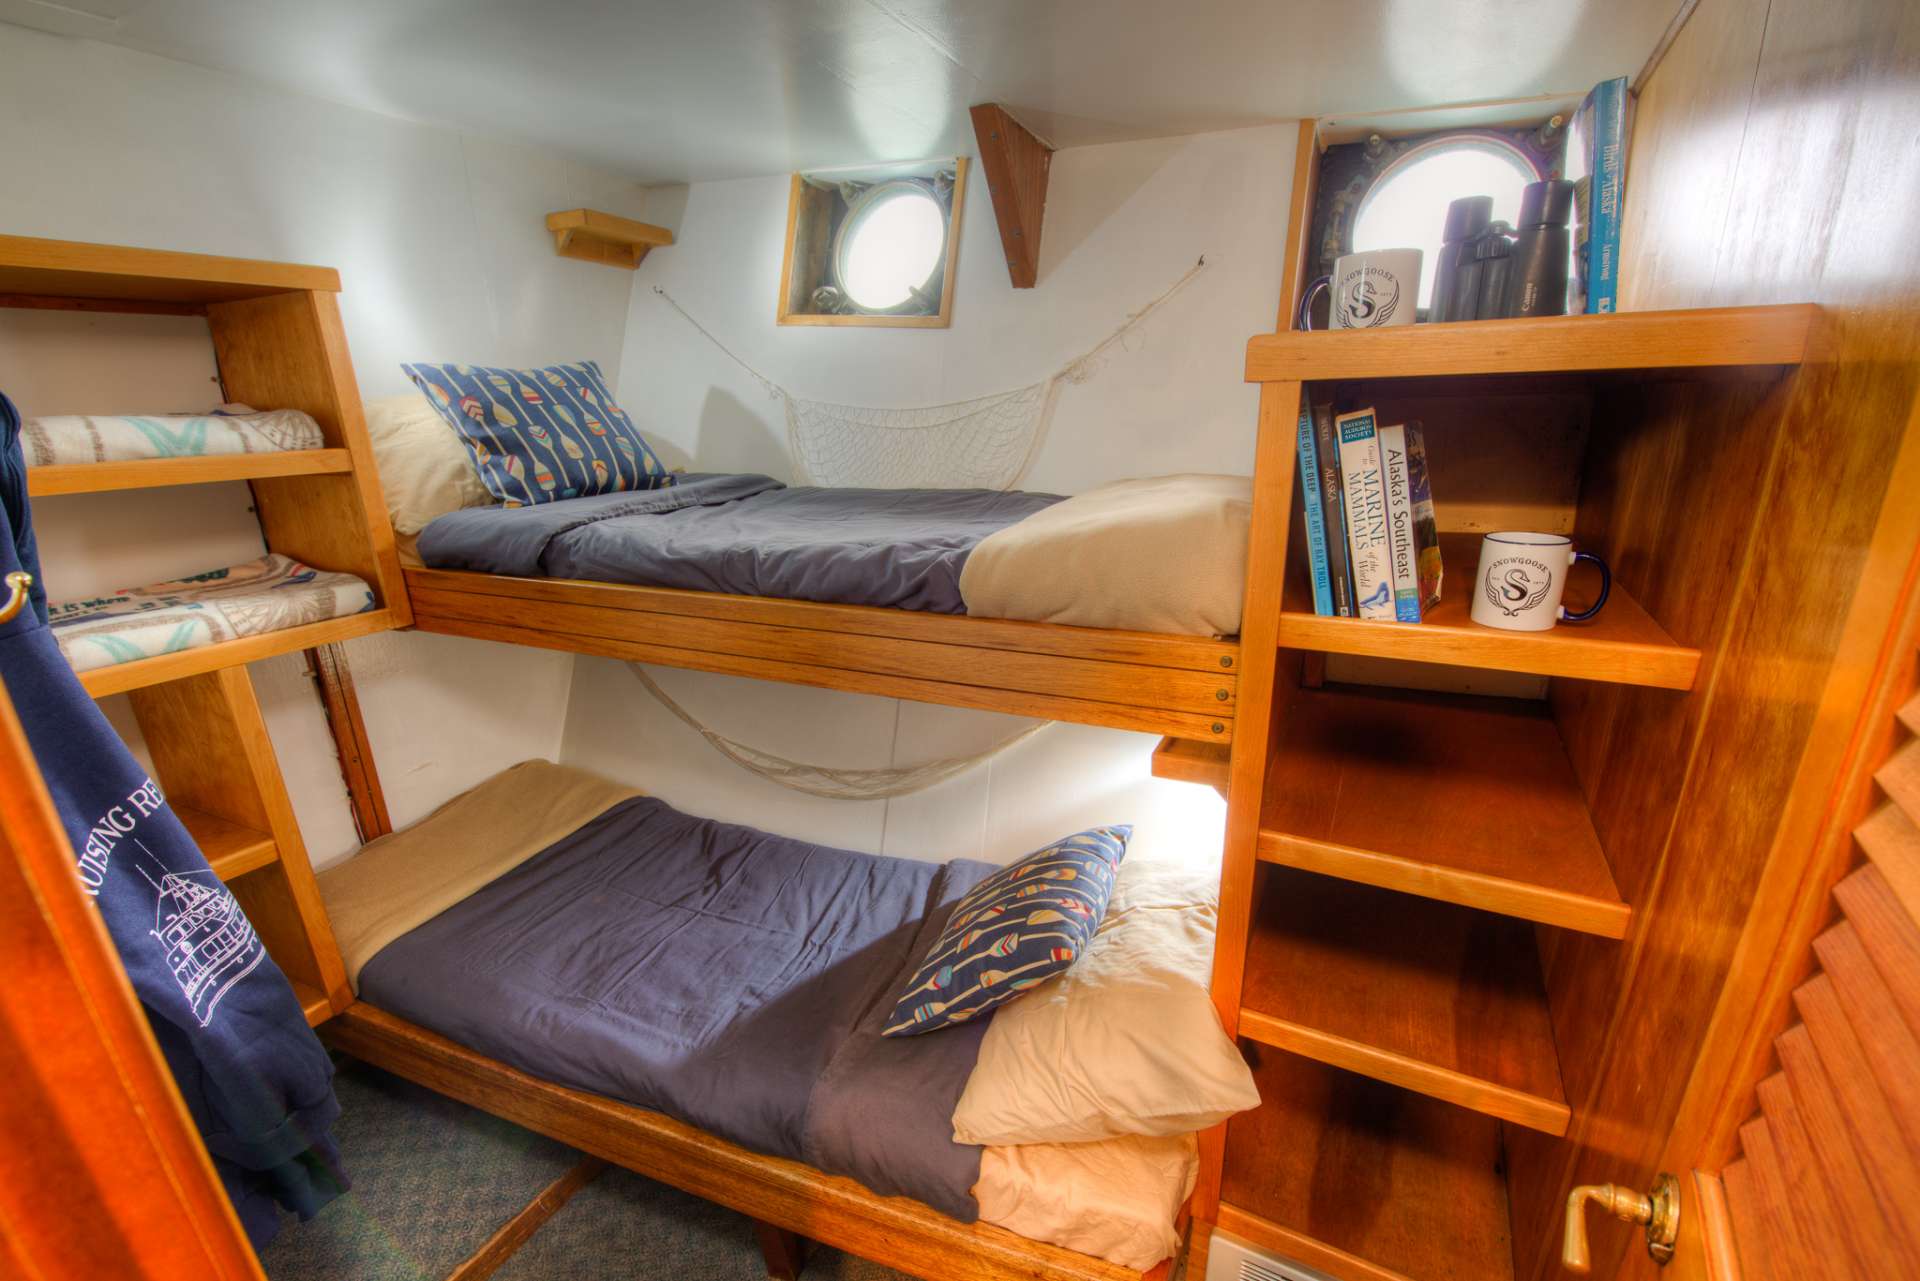 Snow Goose Yacht Charter - 1 of 6 cozy cabins. Each cabin offers a memory foam mattress, and individual outlets.